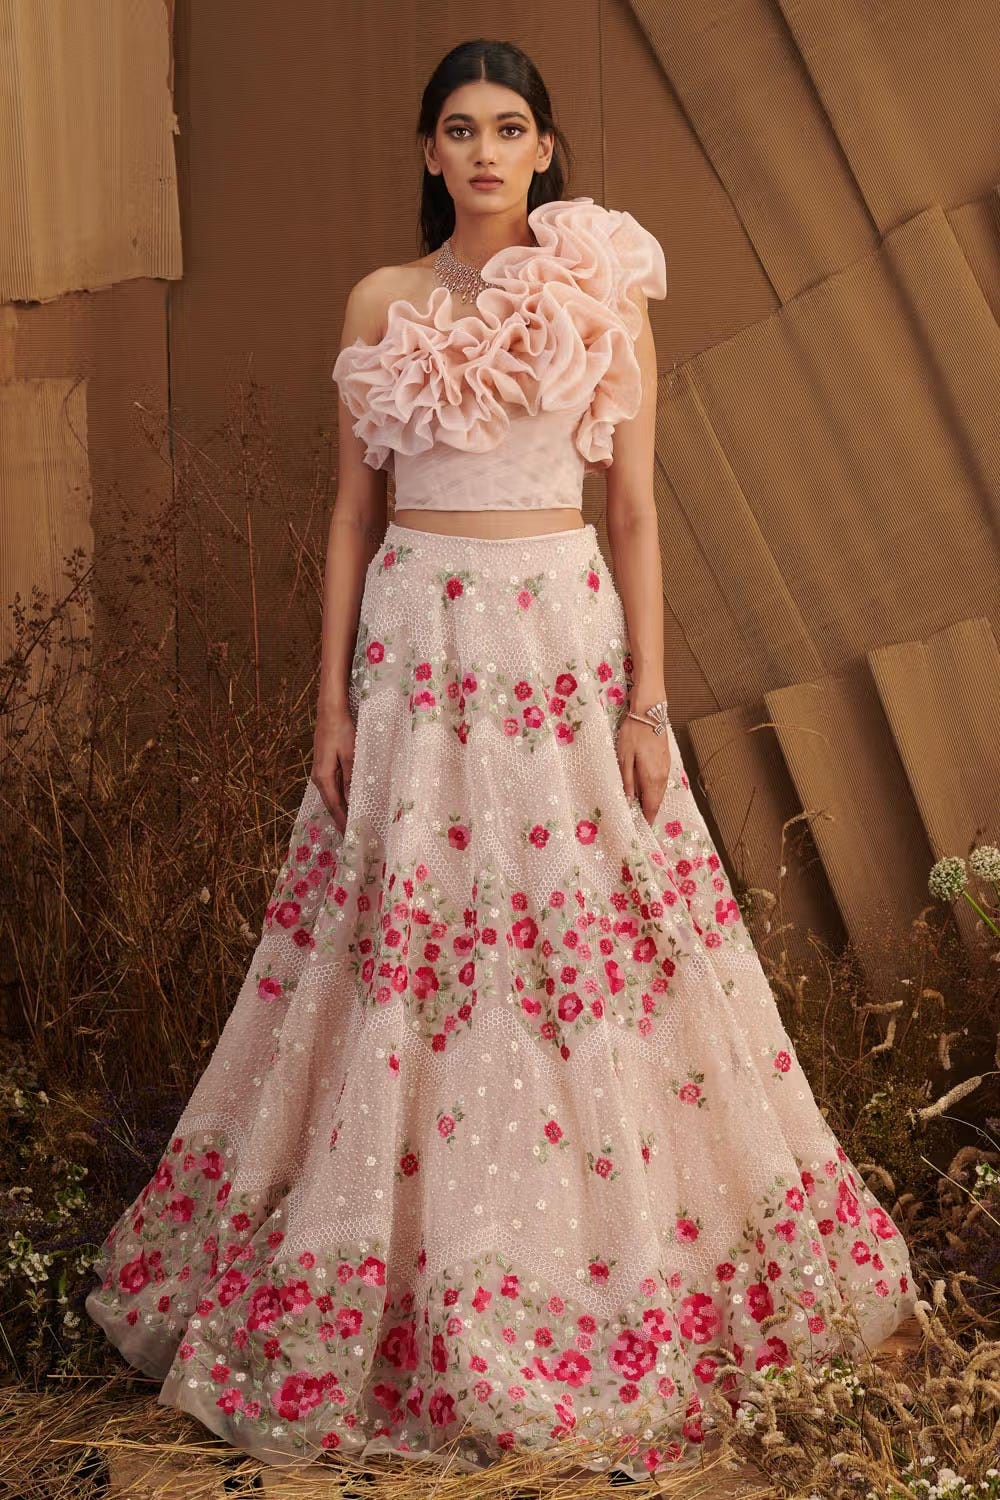 17 Newest Fashion Trends For India Wedding Dresses, by Aashni & Co